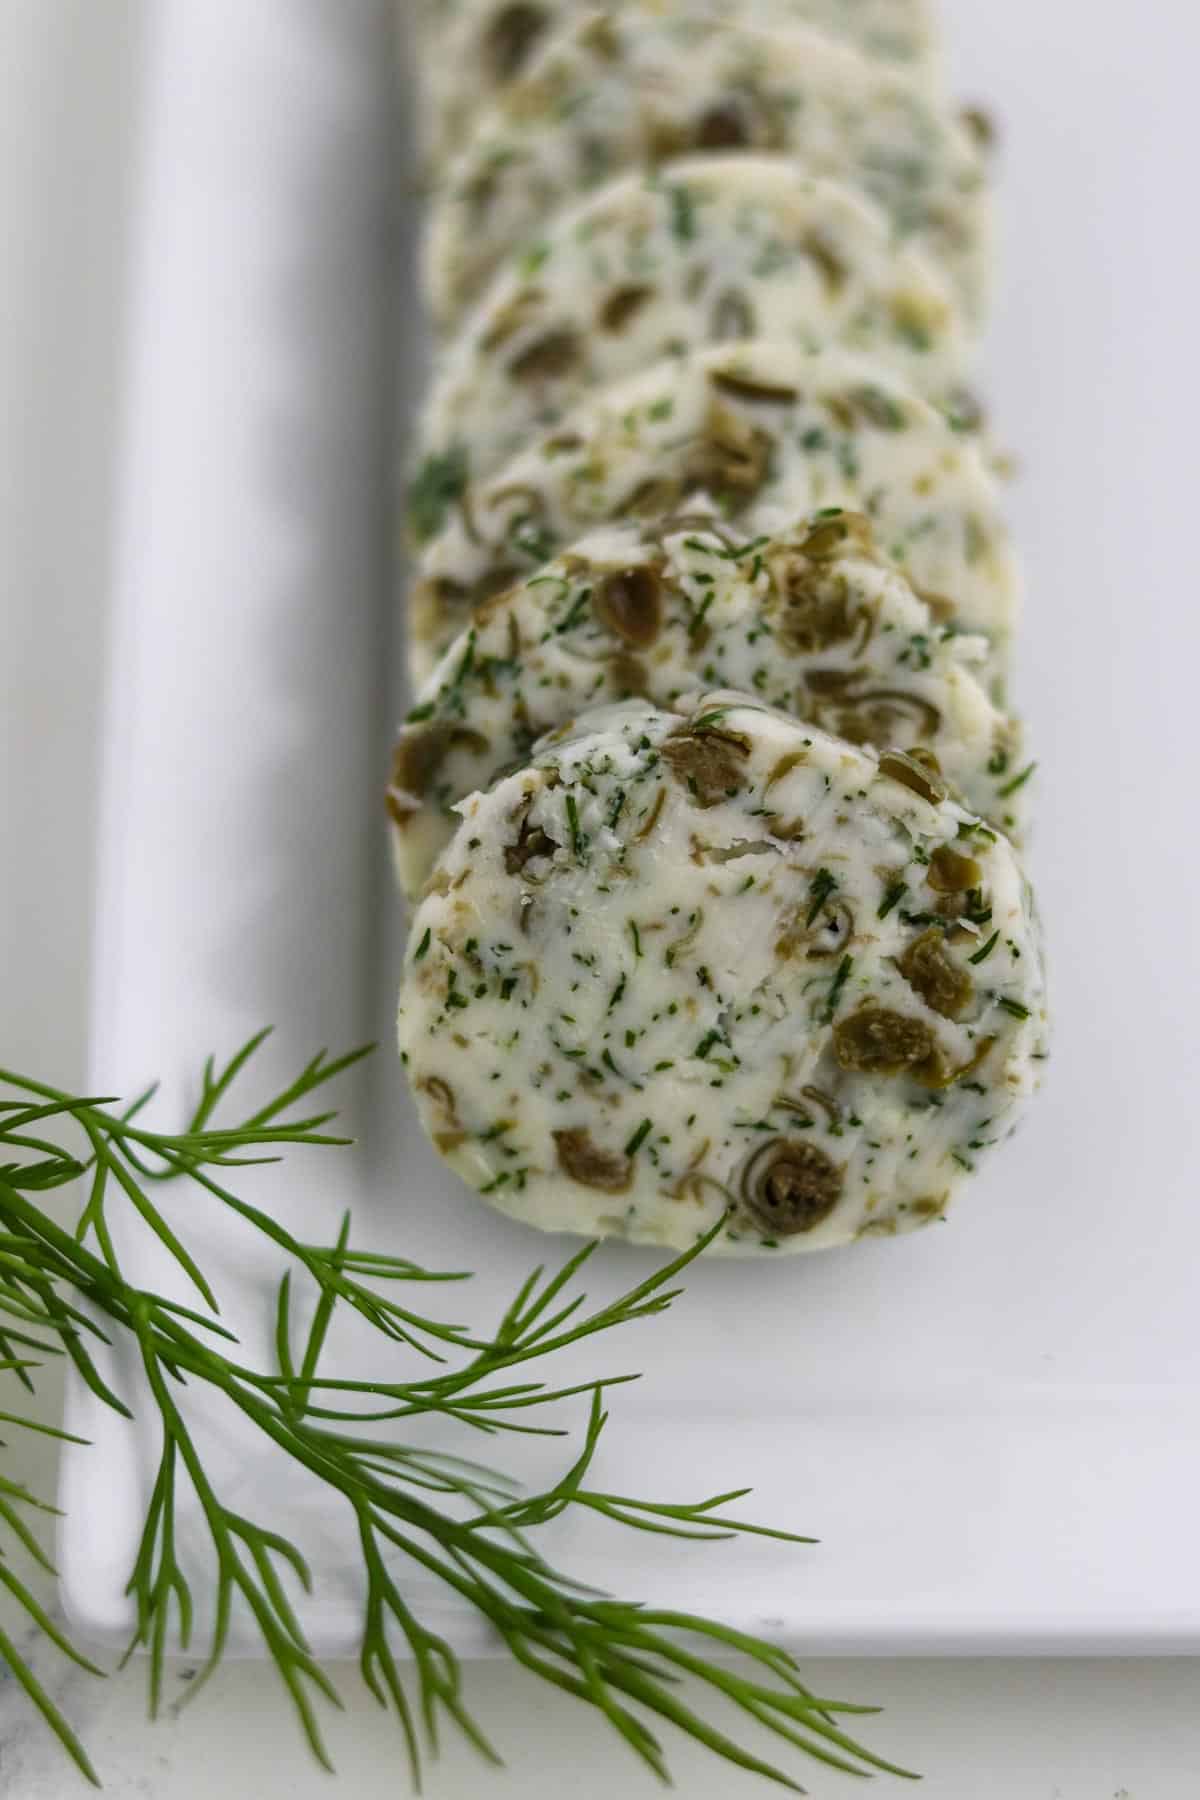 Rounds of Dill Caper Butter on a square plate next to a dill sprig.